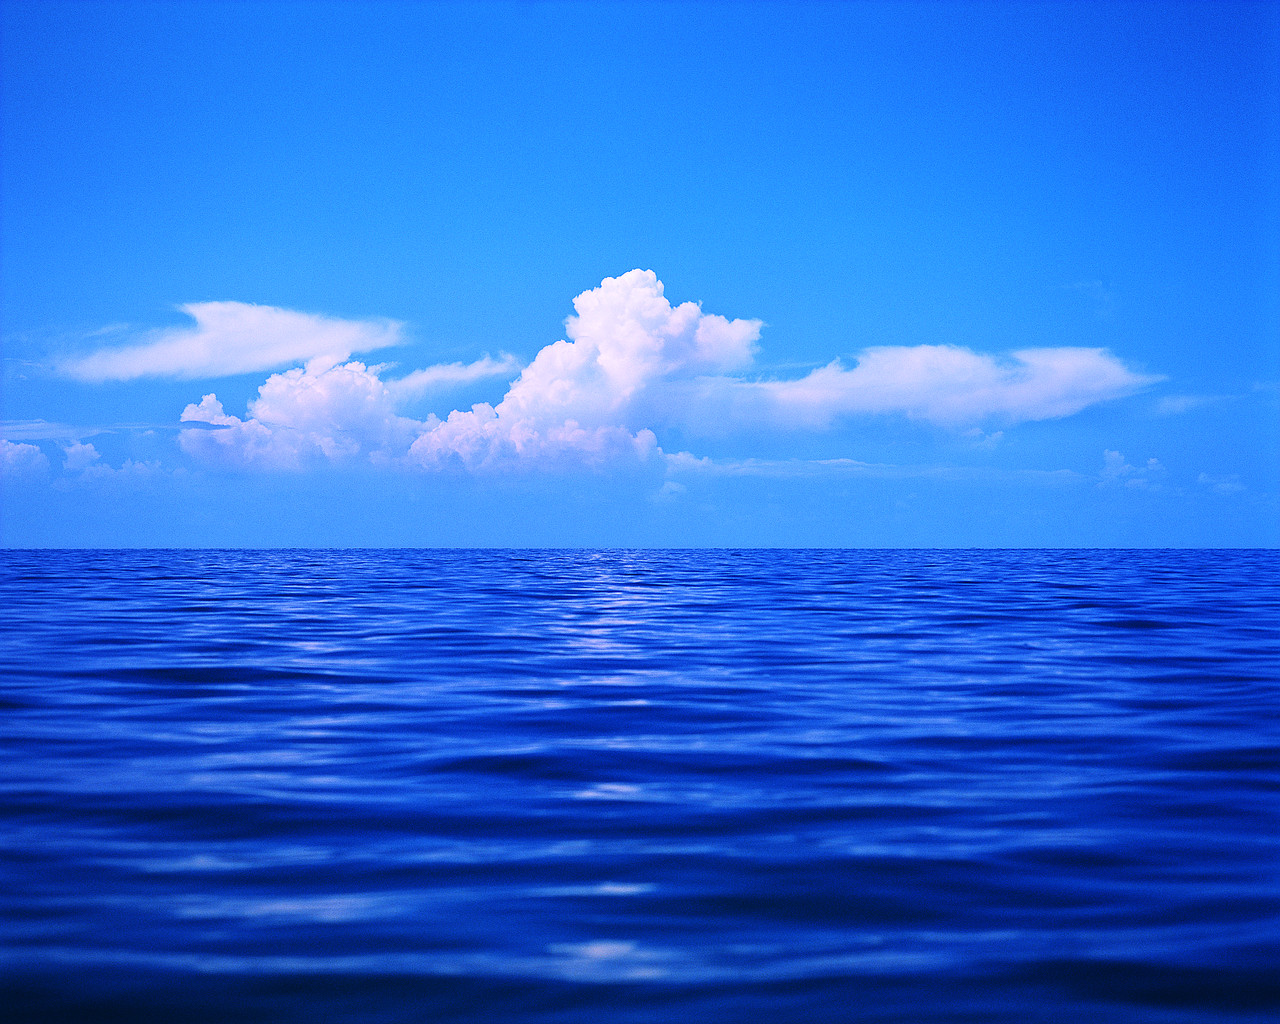 Clouds in a Blue Sky over the Ocean